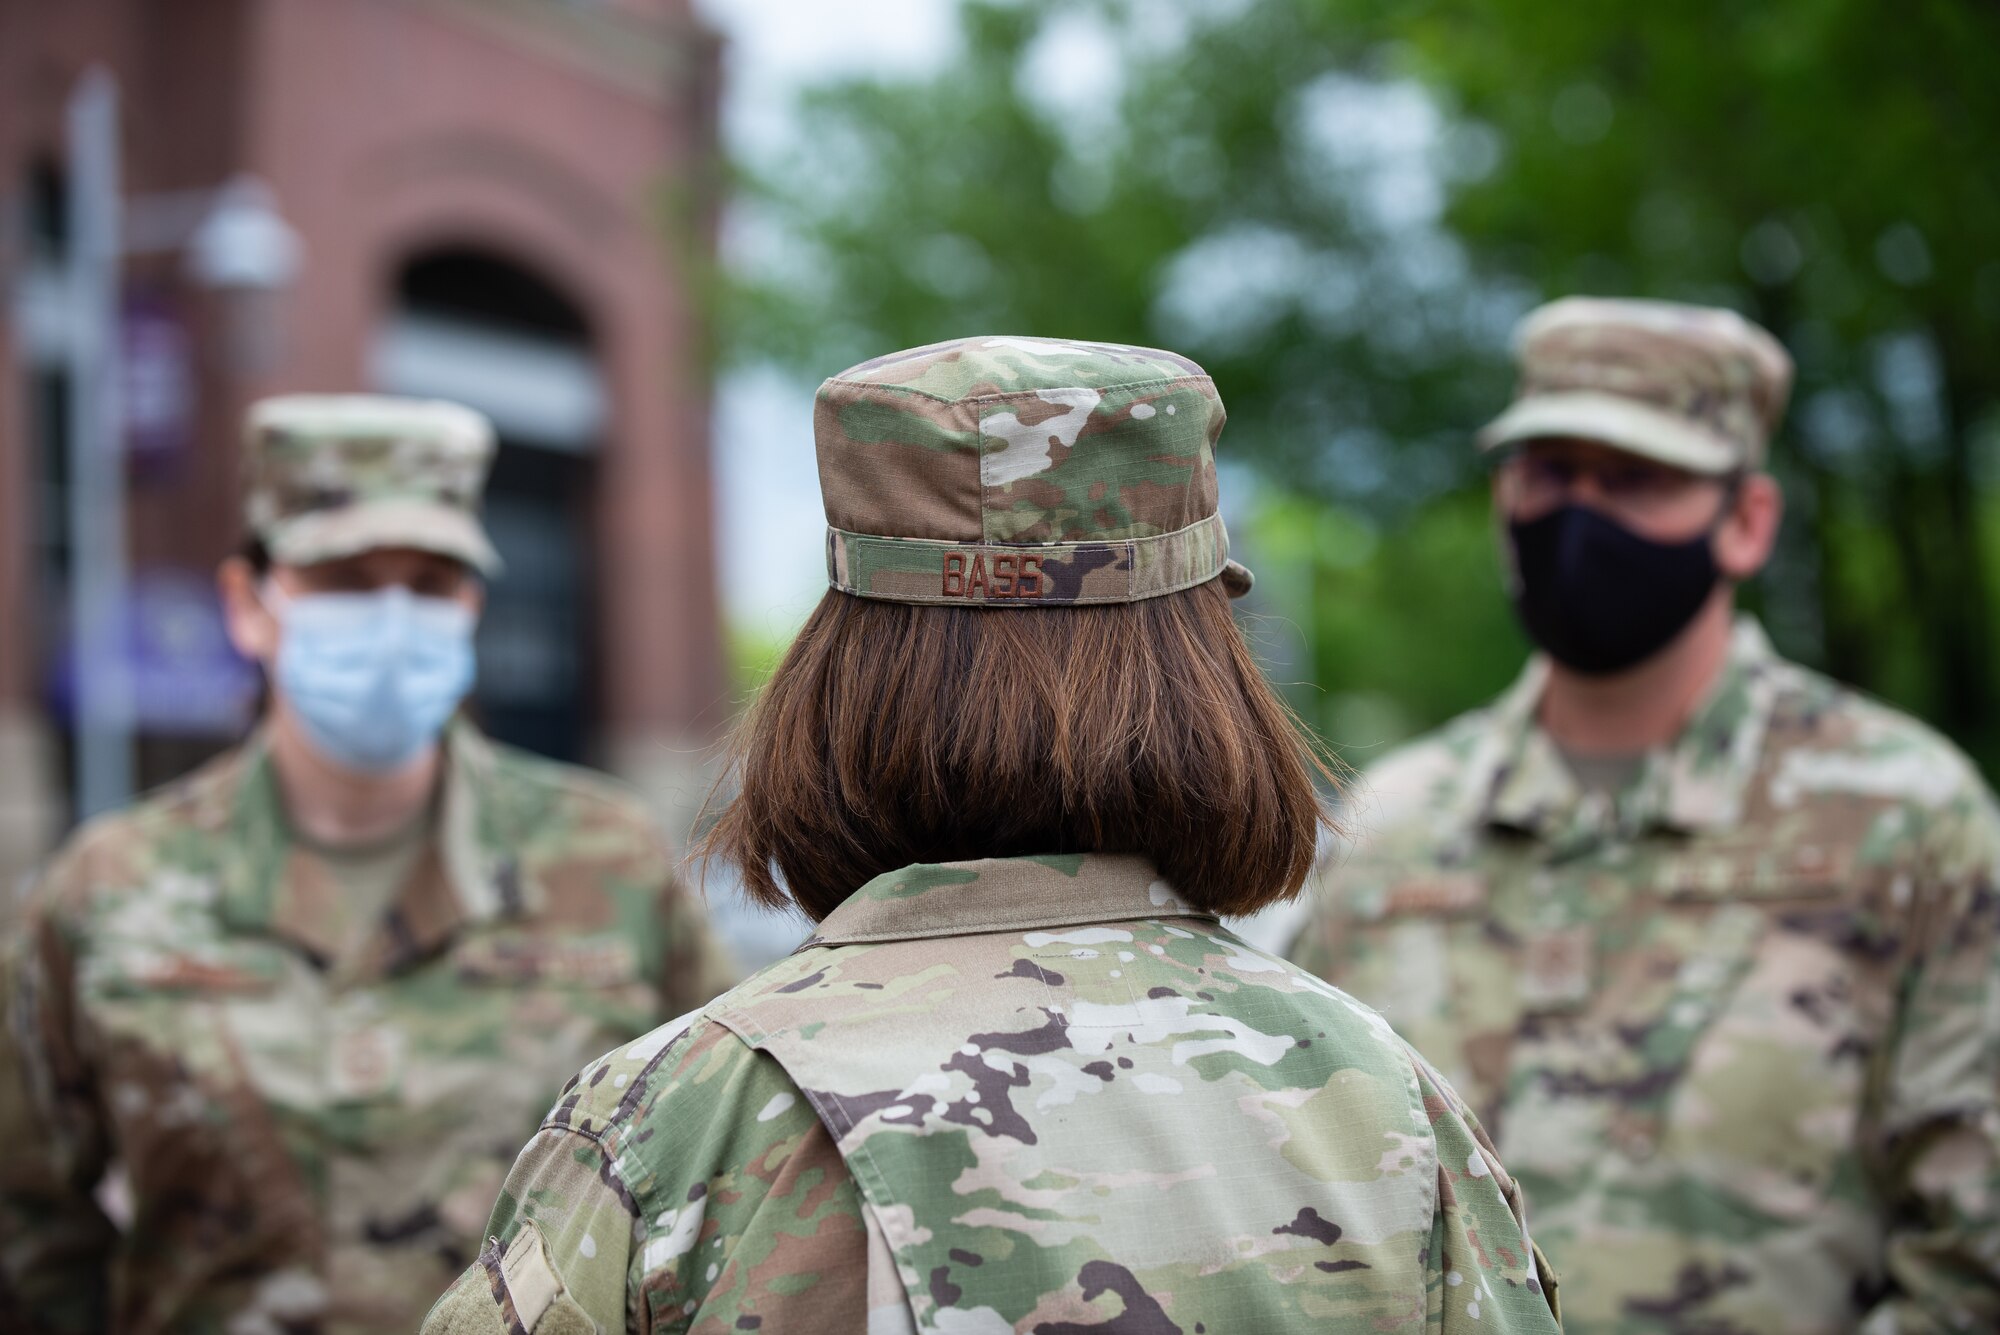 Chief Master Sgt. of the Air Force JoAnne S. Bass speaks to Airmen of the 175th Wing, Maryland National Guard, while visiting the mass vaccination site at M&T Bank Stadium, Baltimore, on May 3, 2021.